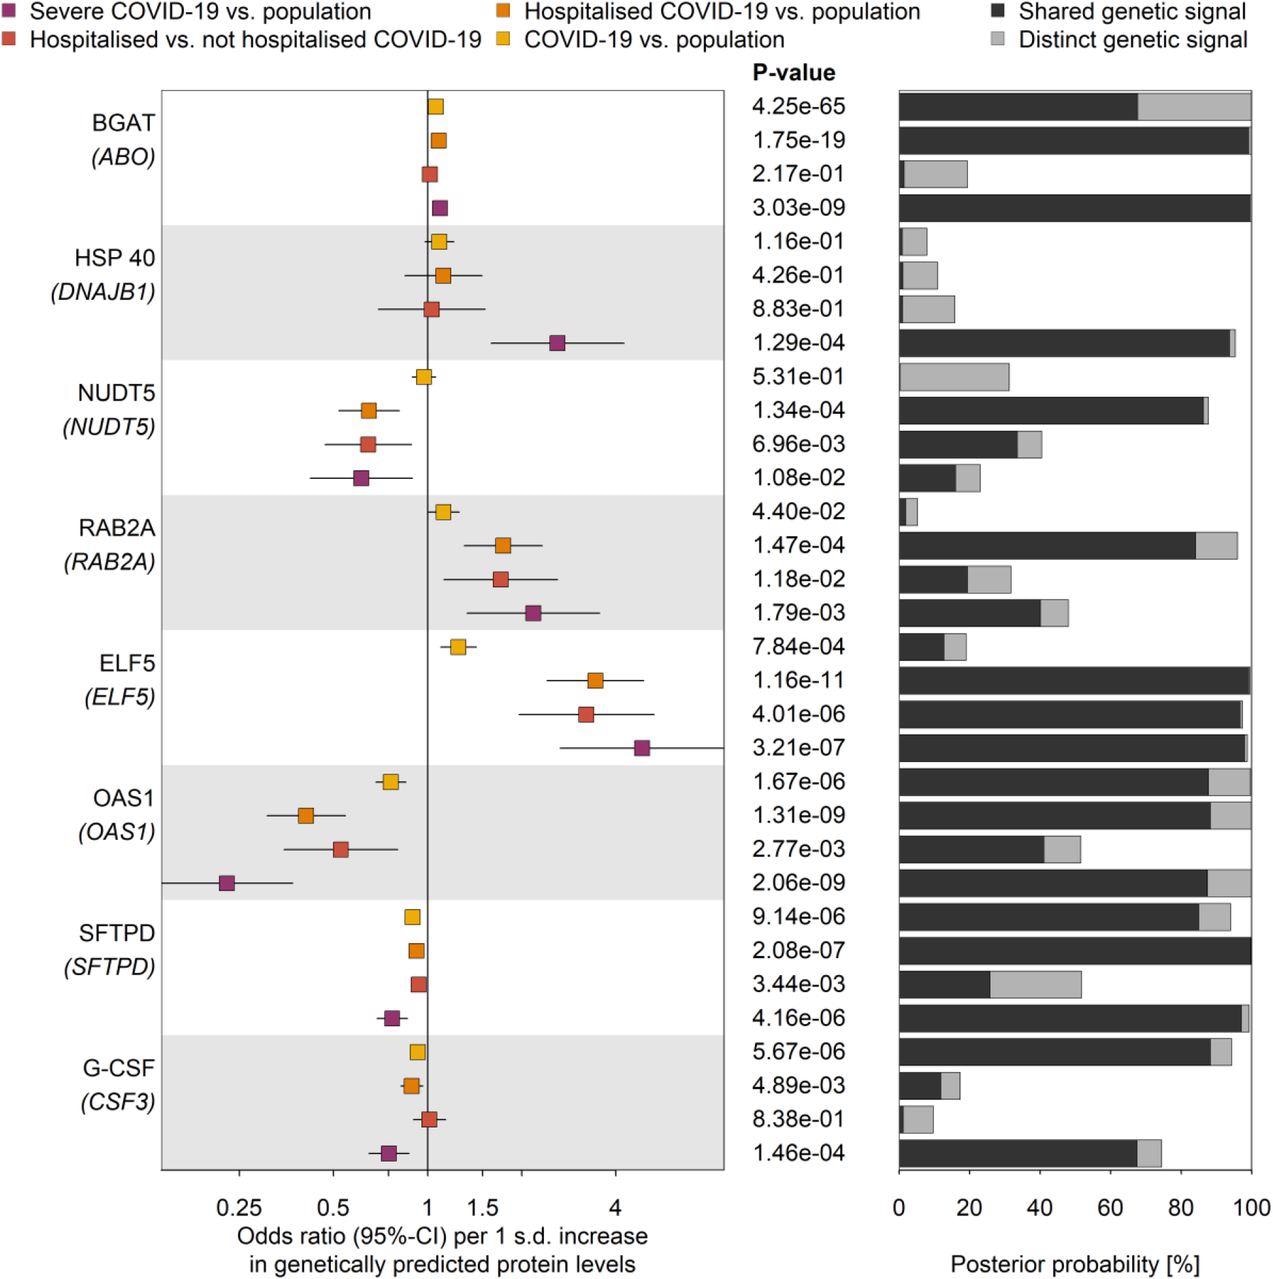 Proteins genetically linked to various COVID-19 outcomes. Odds ratios and 95%-CIs for the genetically predicted effect of protein levels on four different outcome definitions and control populations for COVID-19 (left), including protein targets with strong evidence for statistical colocalization for at least one definition (right). The column in the middle reports p-values. BGAT = Histo-blood group ABO system transferase; HSP 40 = DnaJ homolog subfamily B member 1; NUDT5 = ADP-sugar pyrophosphatase; RAB2A = Ras-related protein Rab-2A; ELF5 = ETS-related transcription factor Elf-5; OAS1 = 2’-5’-oligoadenylate synthase 1; SFTPD = Pulmonary surfactant-associated protein D; G-CSF = Granulocyte colony-stimulating factor